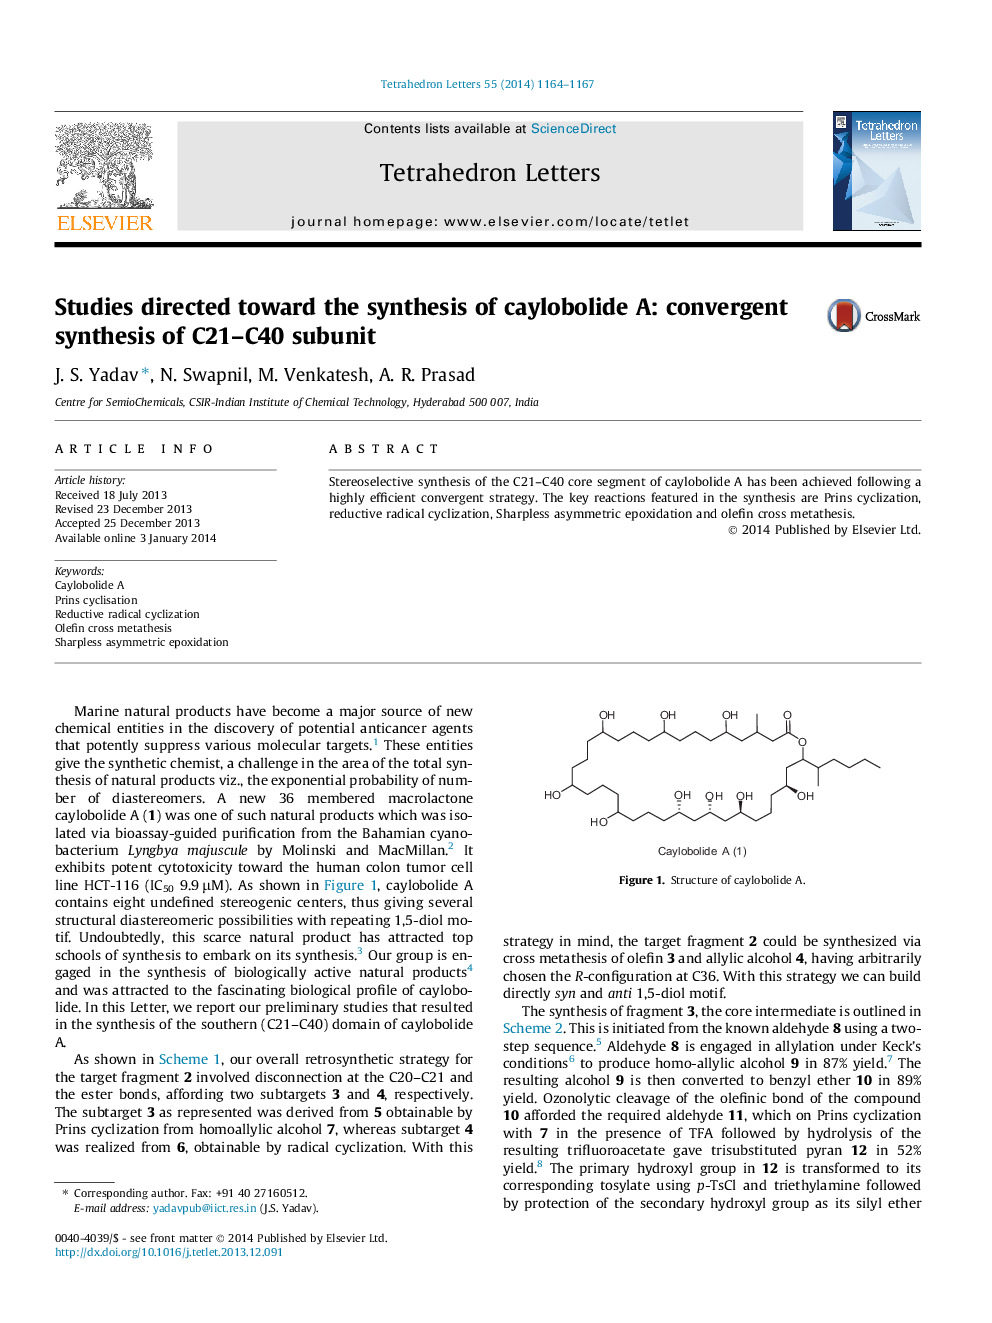 Studies directed toward the synthesis of caylobolide A: convergent synthesis of C21-C40 subunit